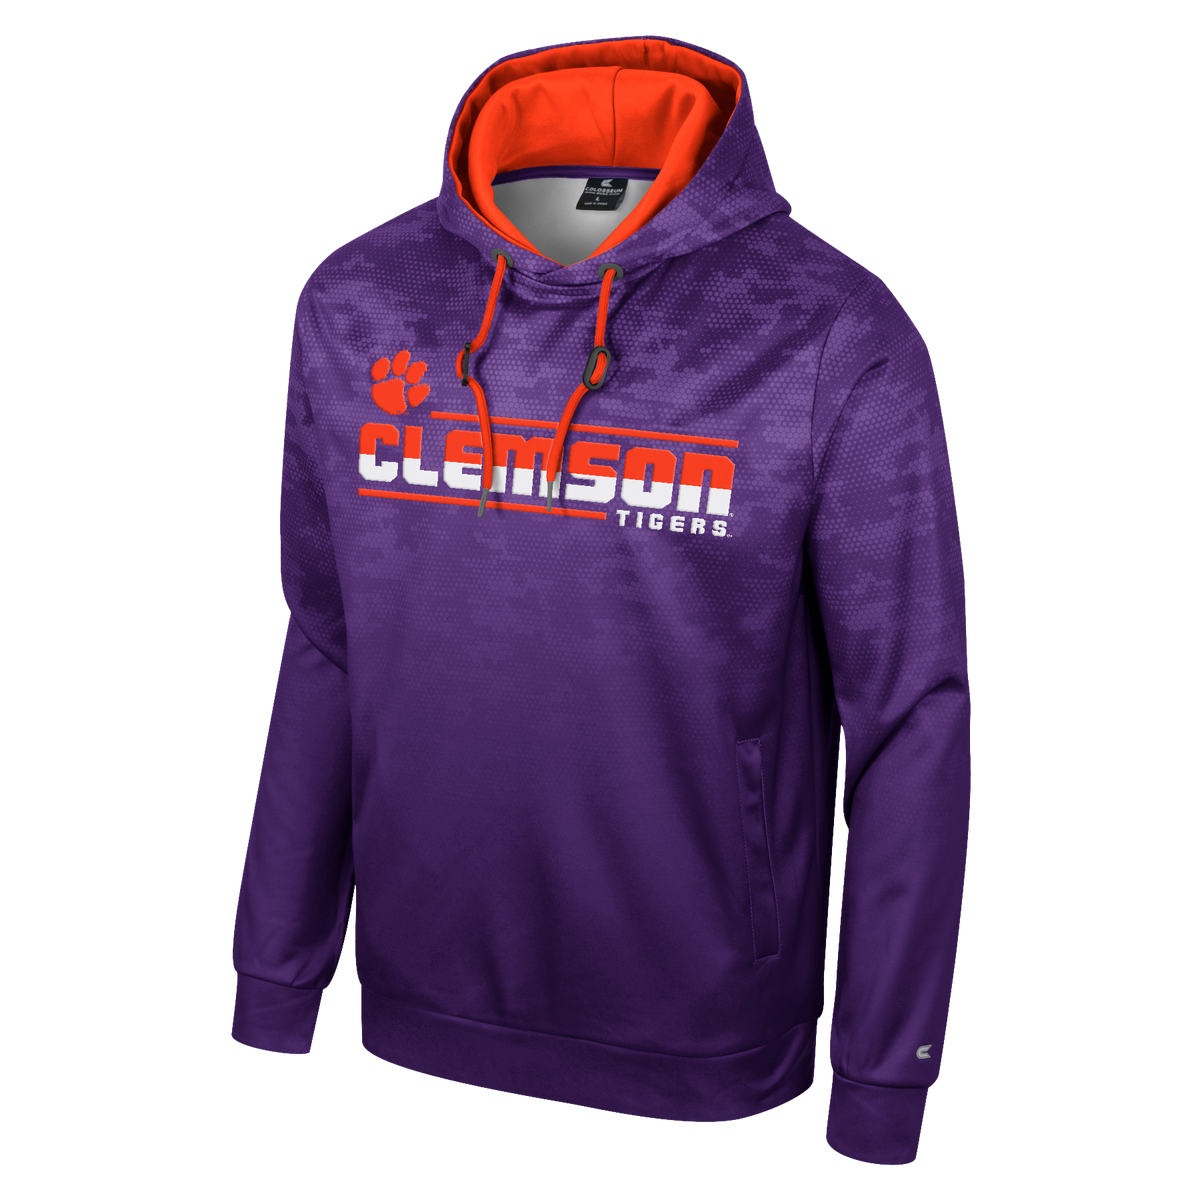 The Machine Clemson Sublimated Hoodie